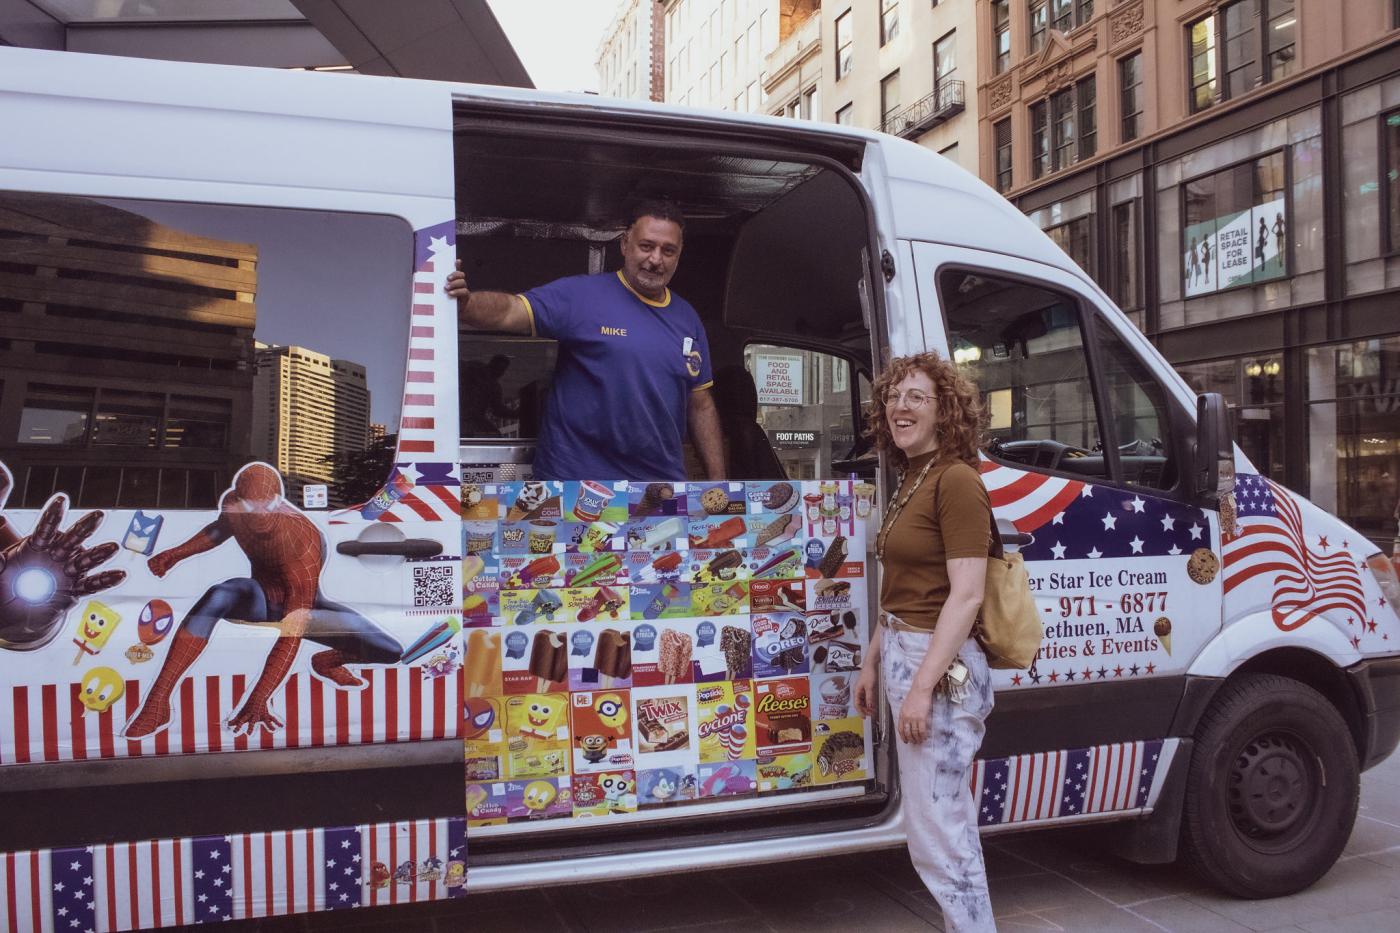 A white woman poses with a man inside an Ice Cream Truck.